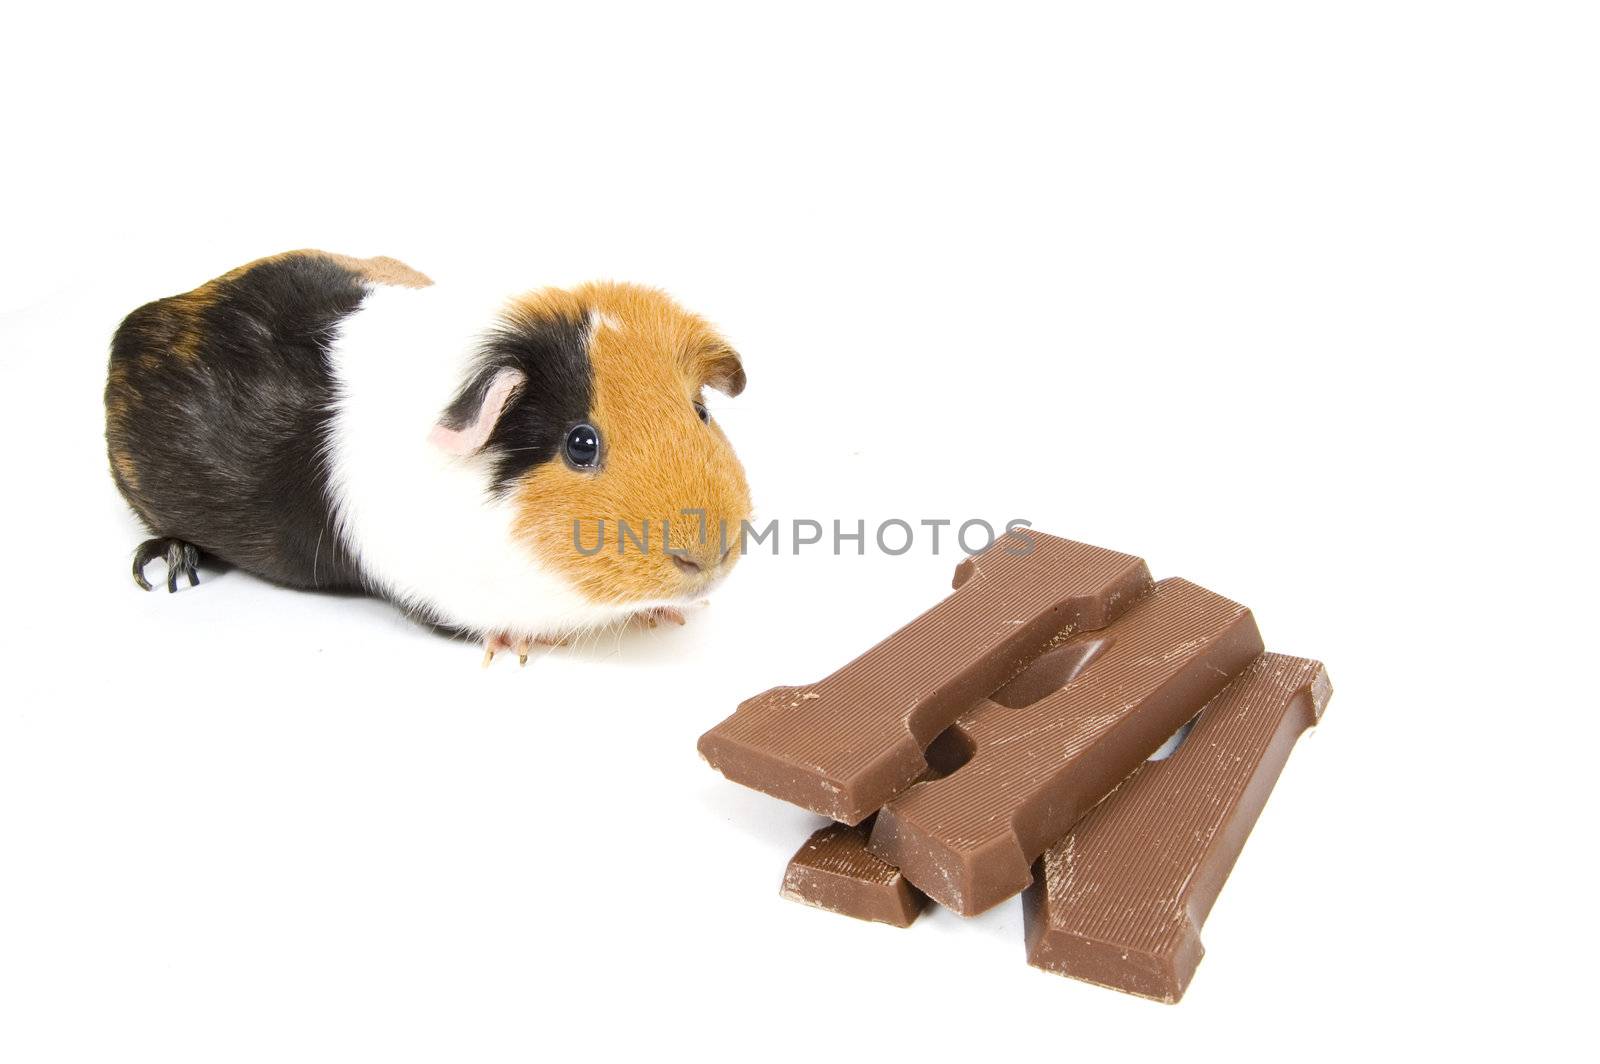 guinea pig with a chocolate letter for dutch holiday called sinterklaas on white